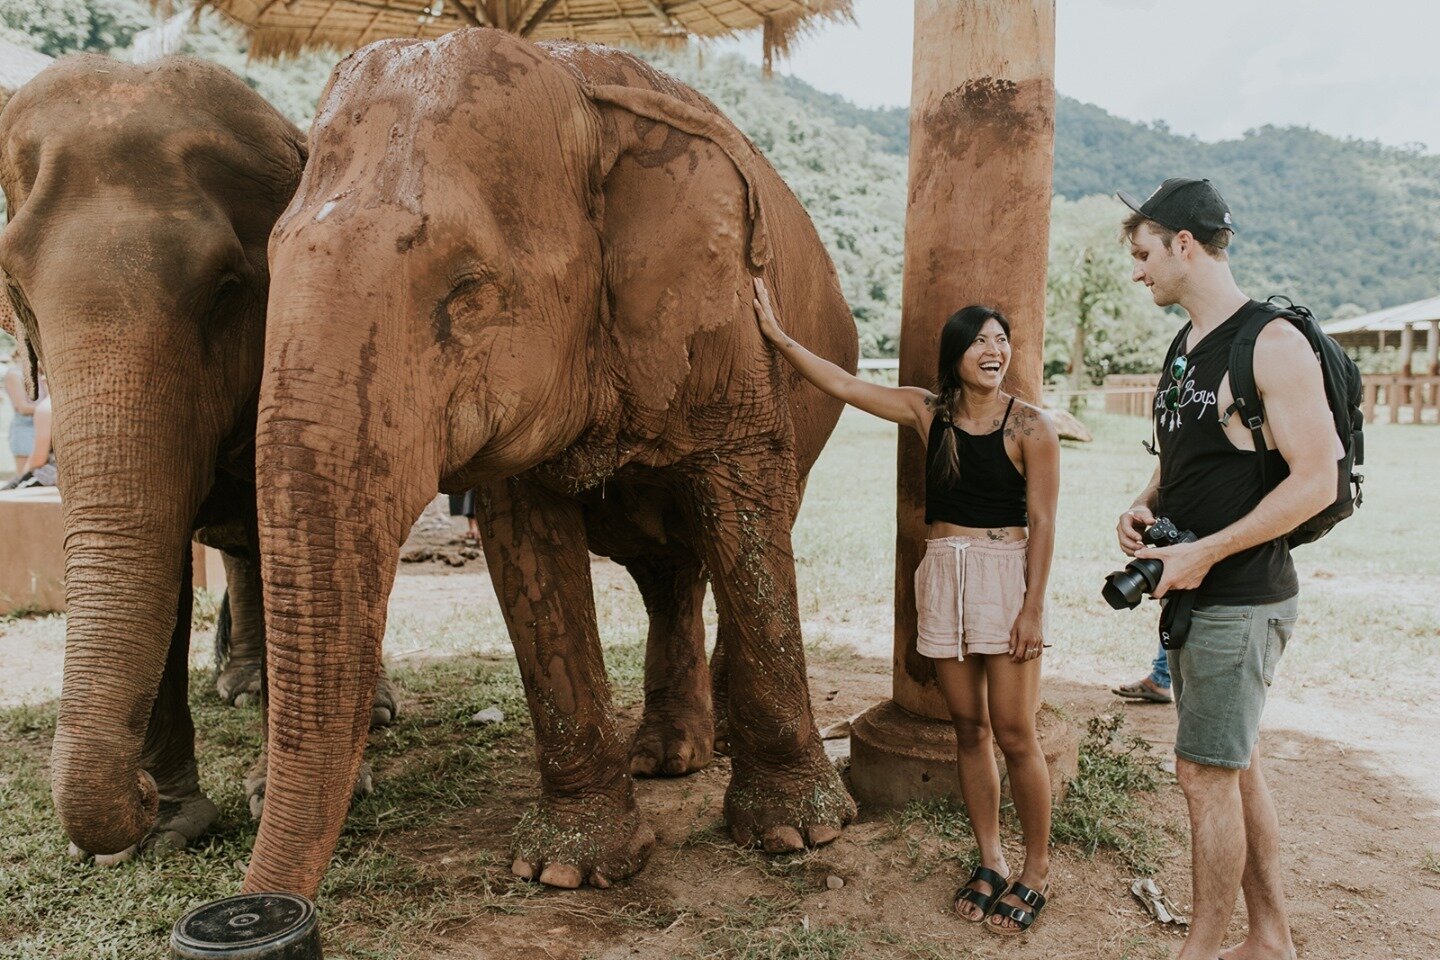 Oh, to be back in Chiang Mai in the sweltering heat amongst these great creatures. 😍⁠
⁠
One adventure last year involved exploring in @elephantnaturepark - an elephant rescue and rehabilitation center in Northern Thailand where you can visit &amp; v